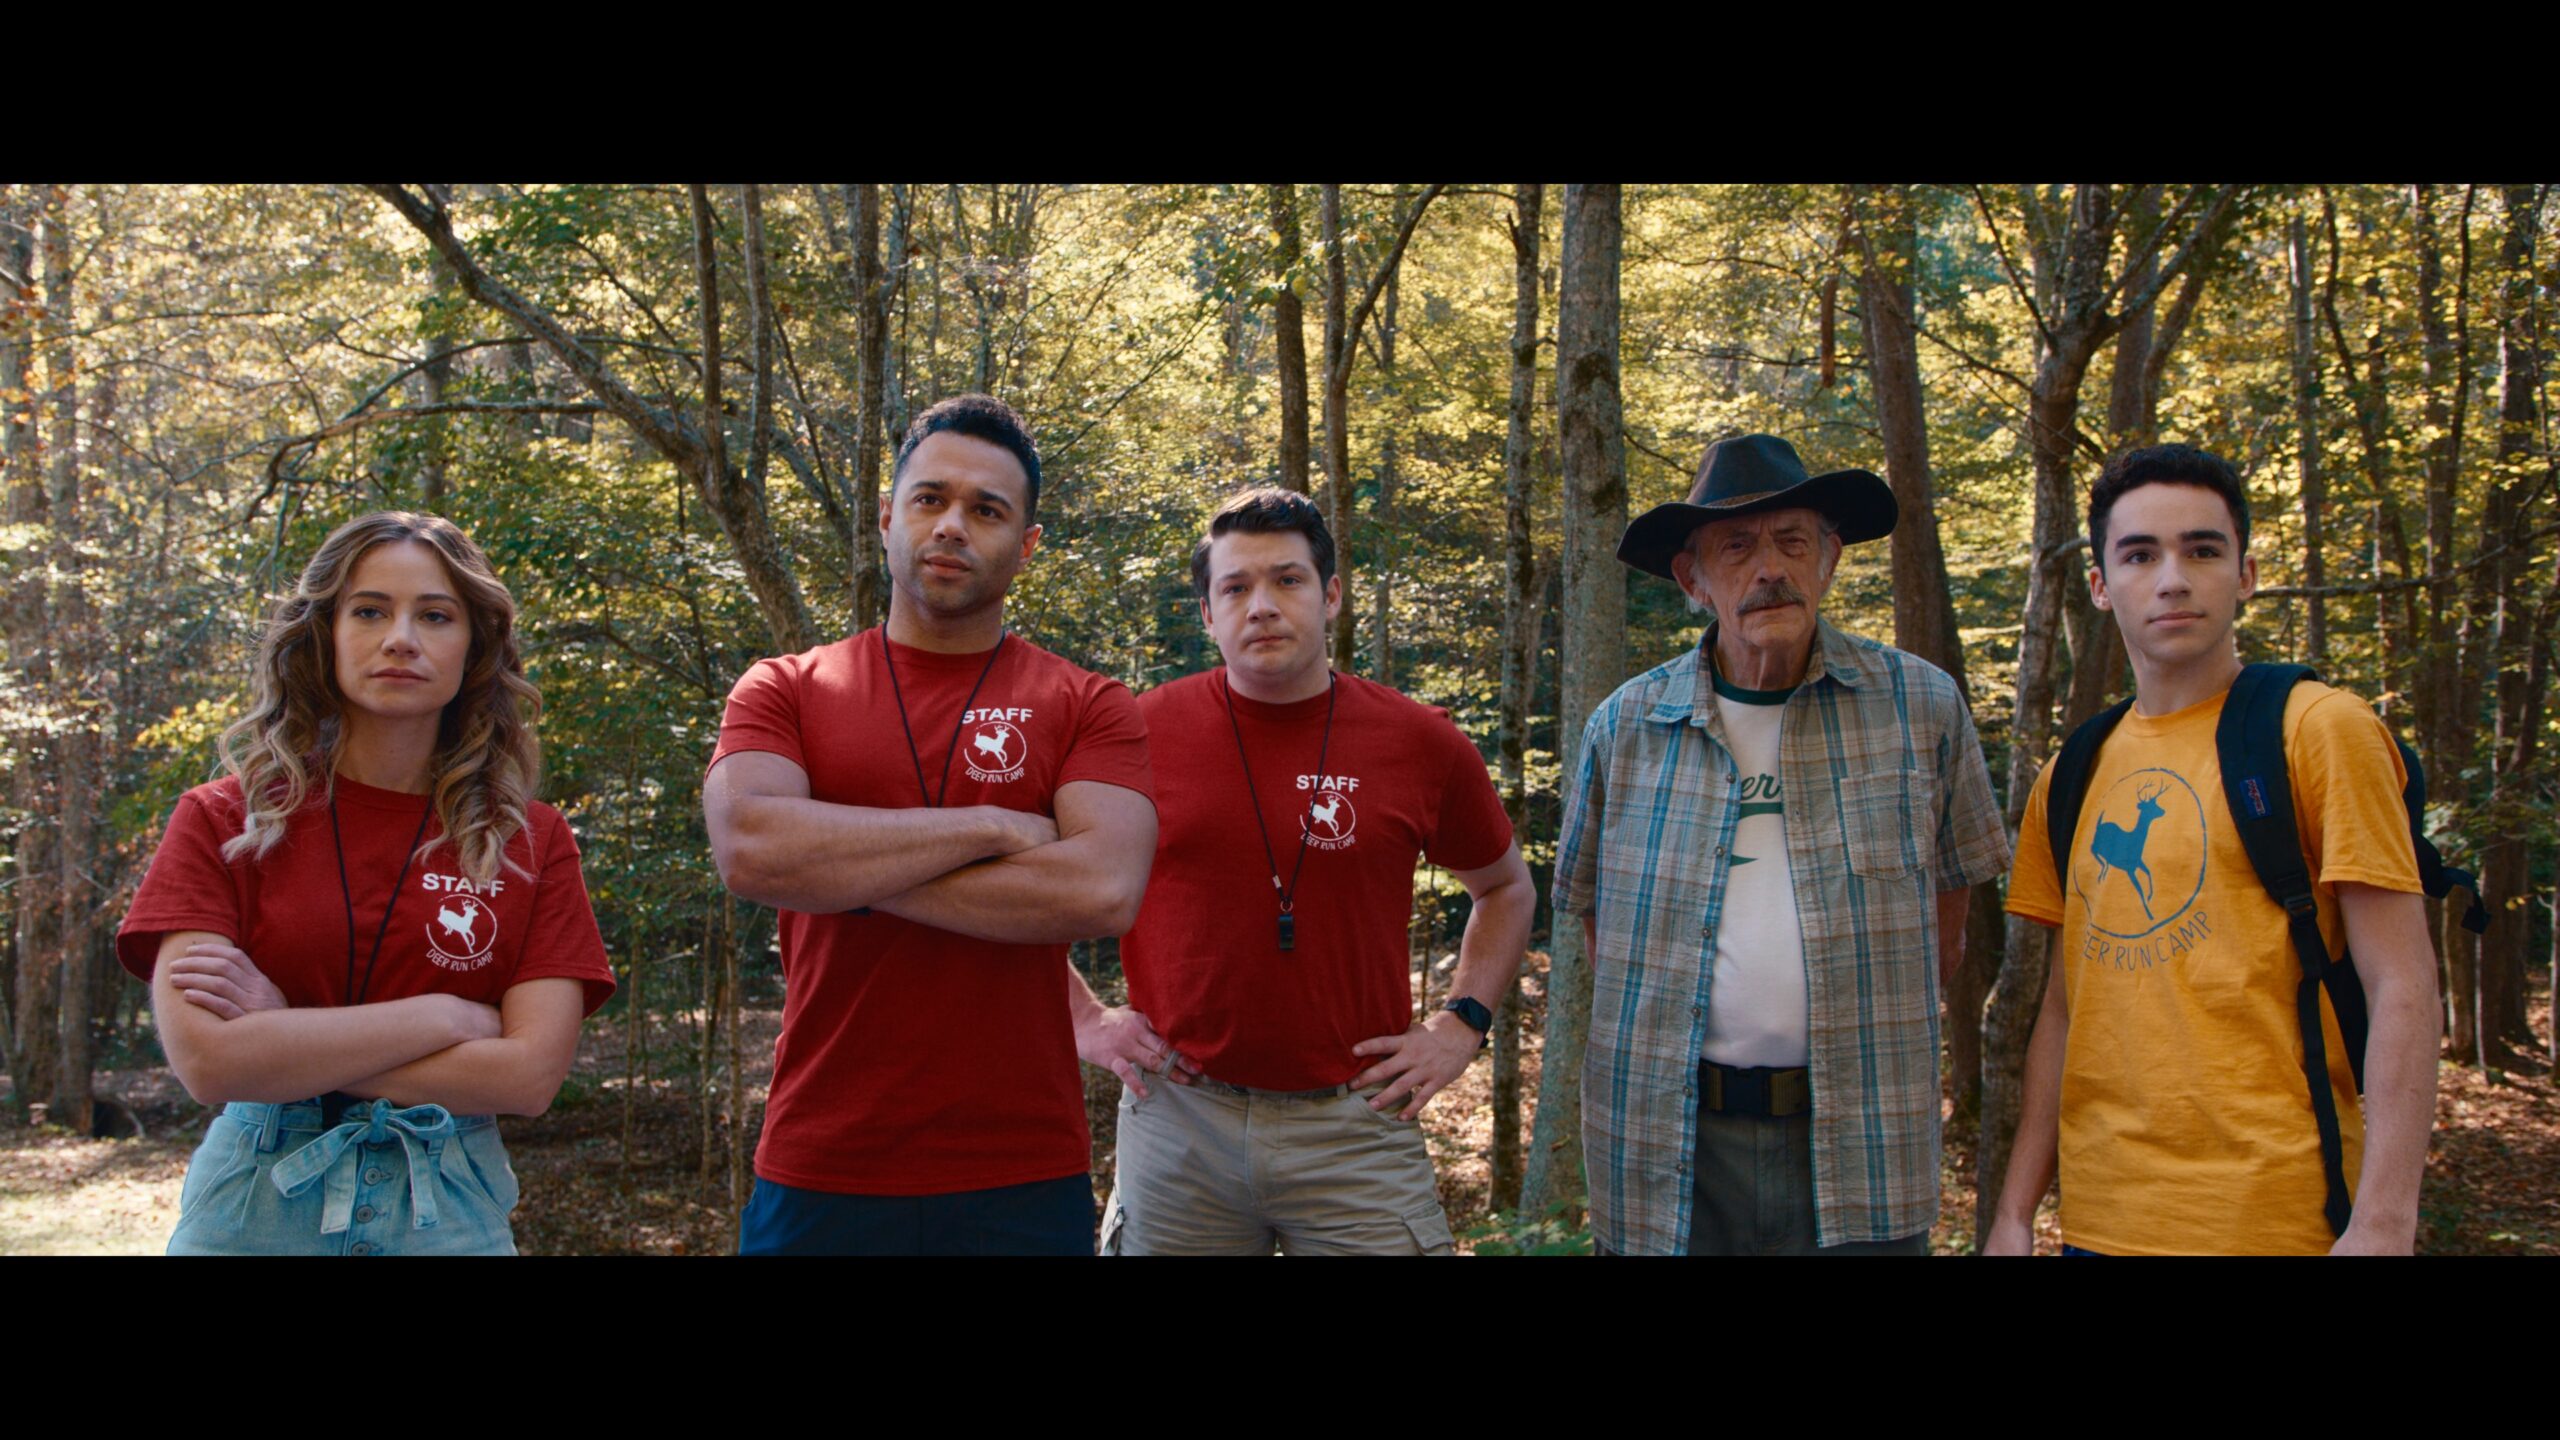 Camp Hideout | Sean Olson on Making a Fun Outdoor Kids Movie with Christopher Lloyd